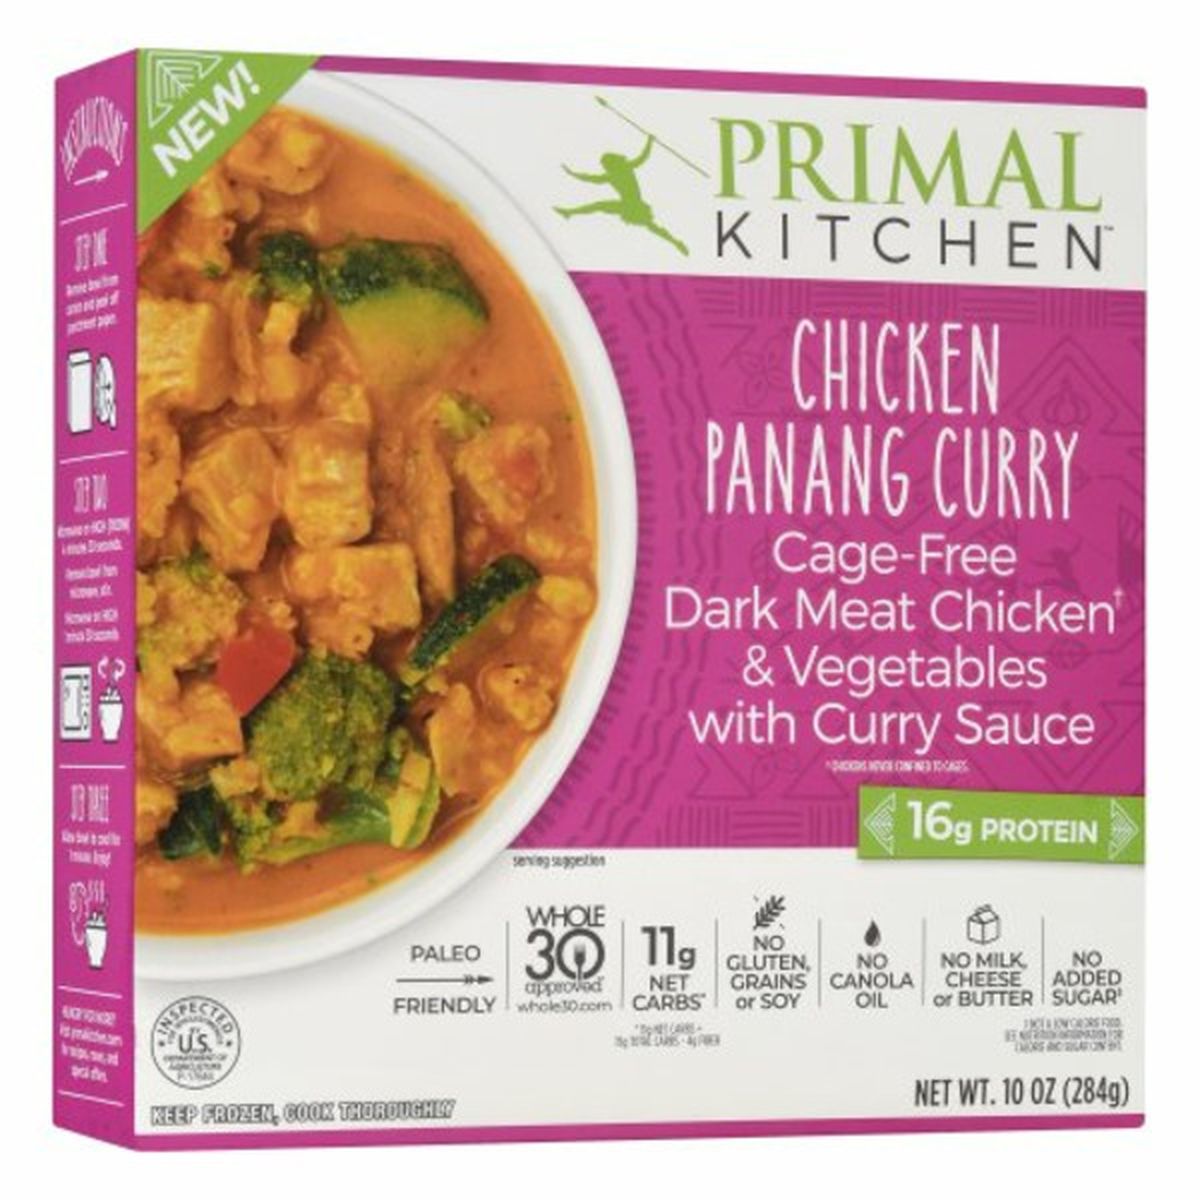 Calories in Primal Kitchen Chicken Panang Curry